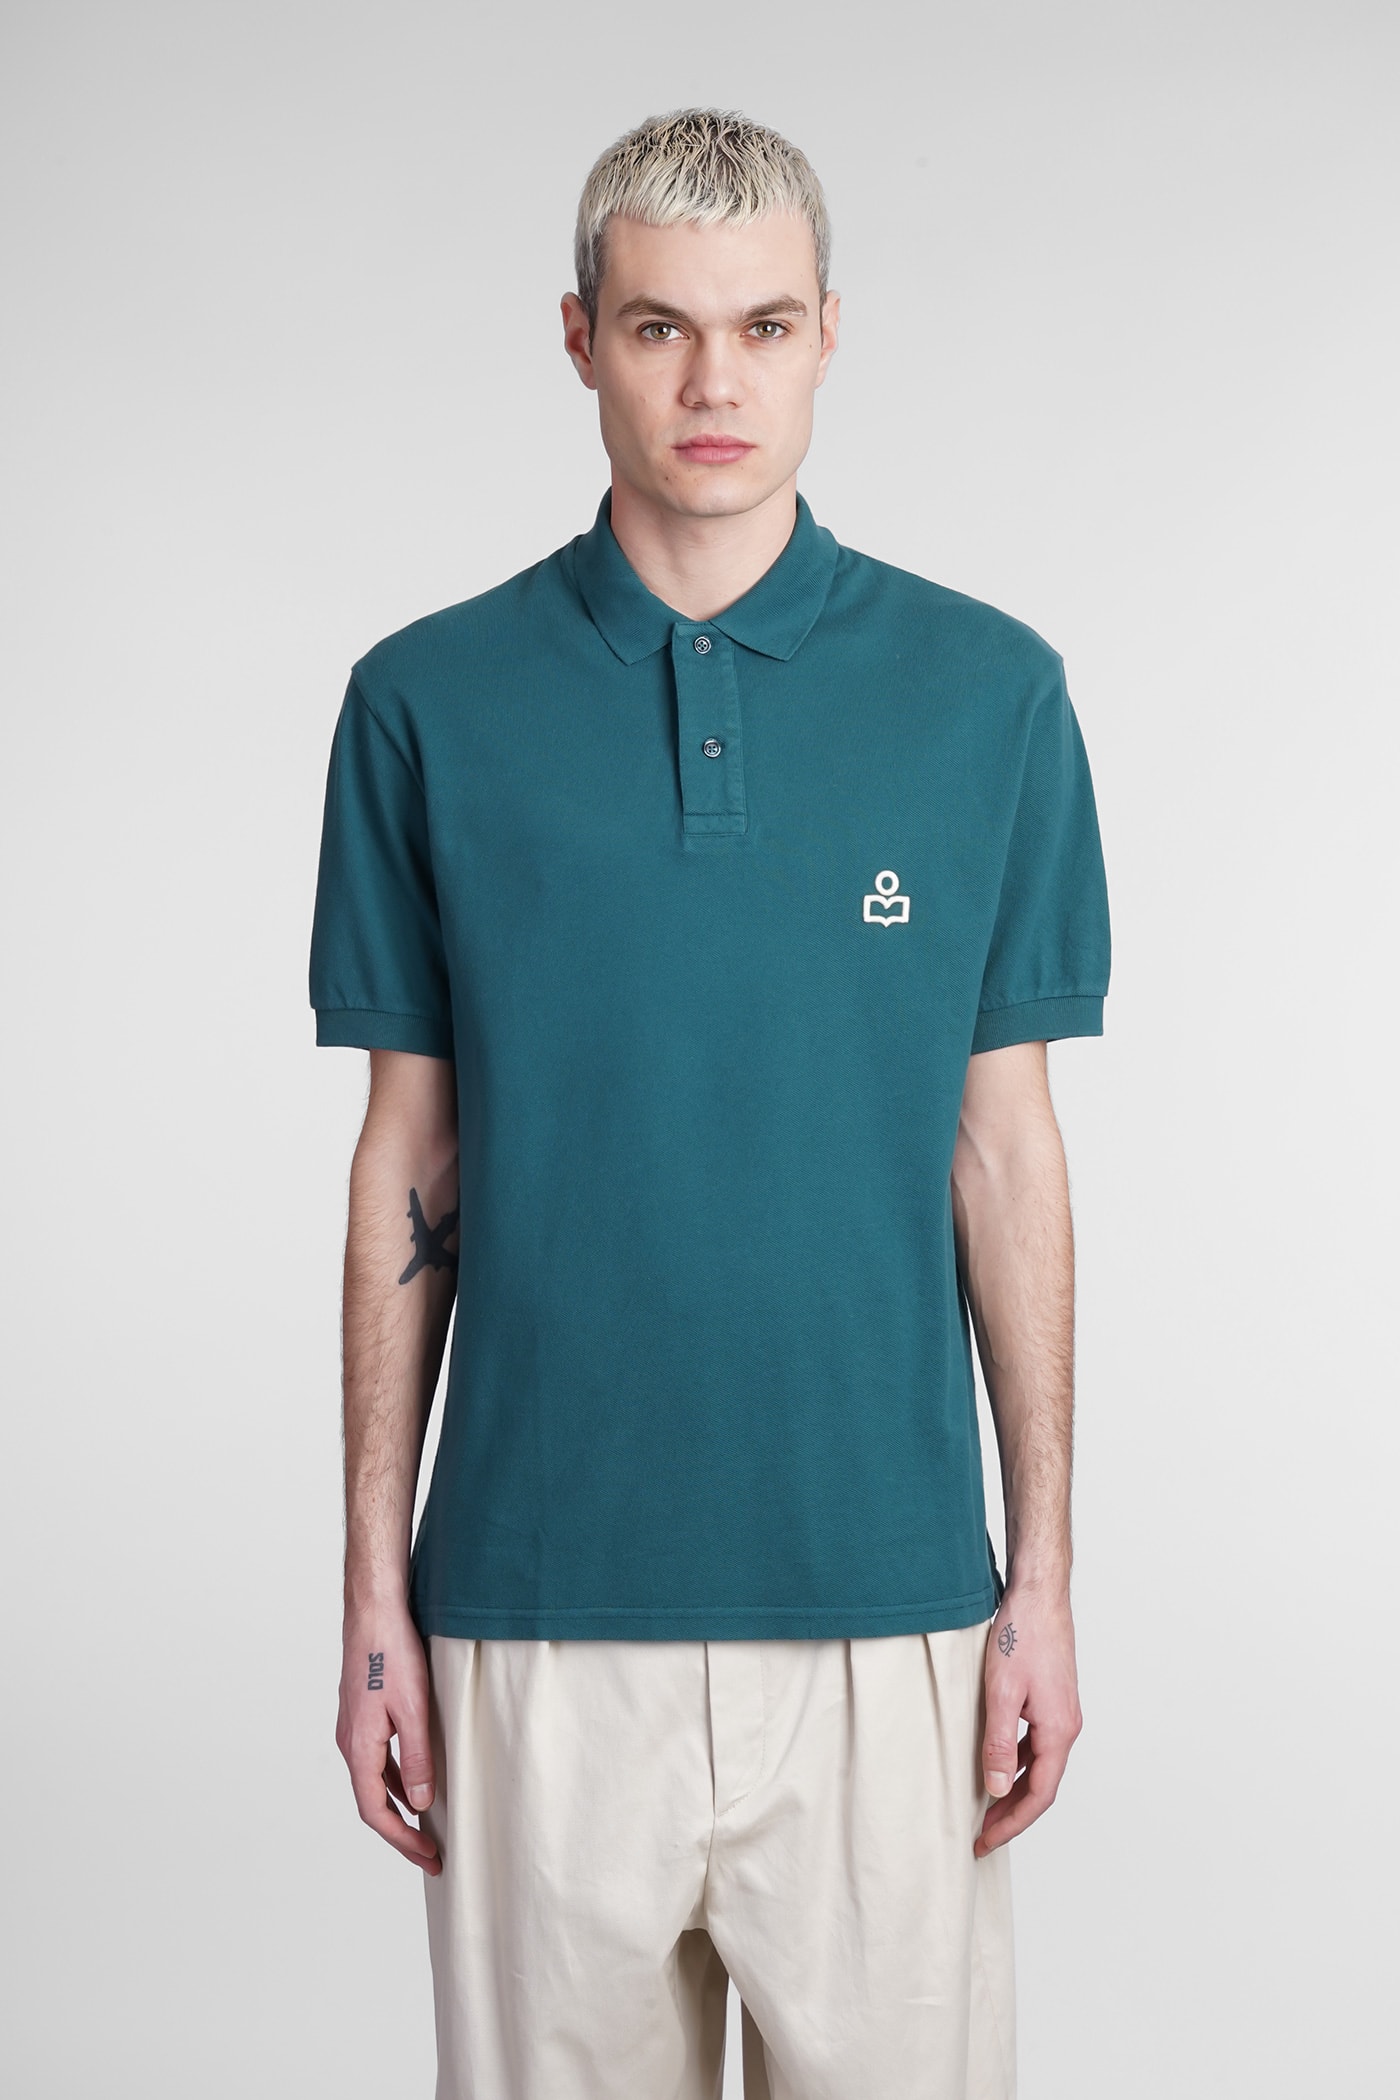 ISABEL MARANT AFKO POLO IN GREEN COTTON